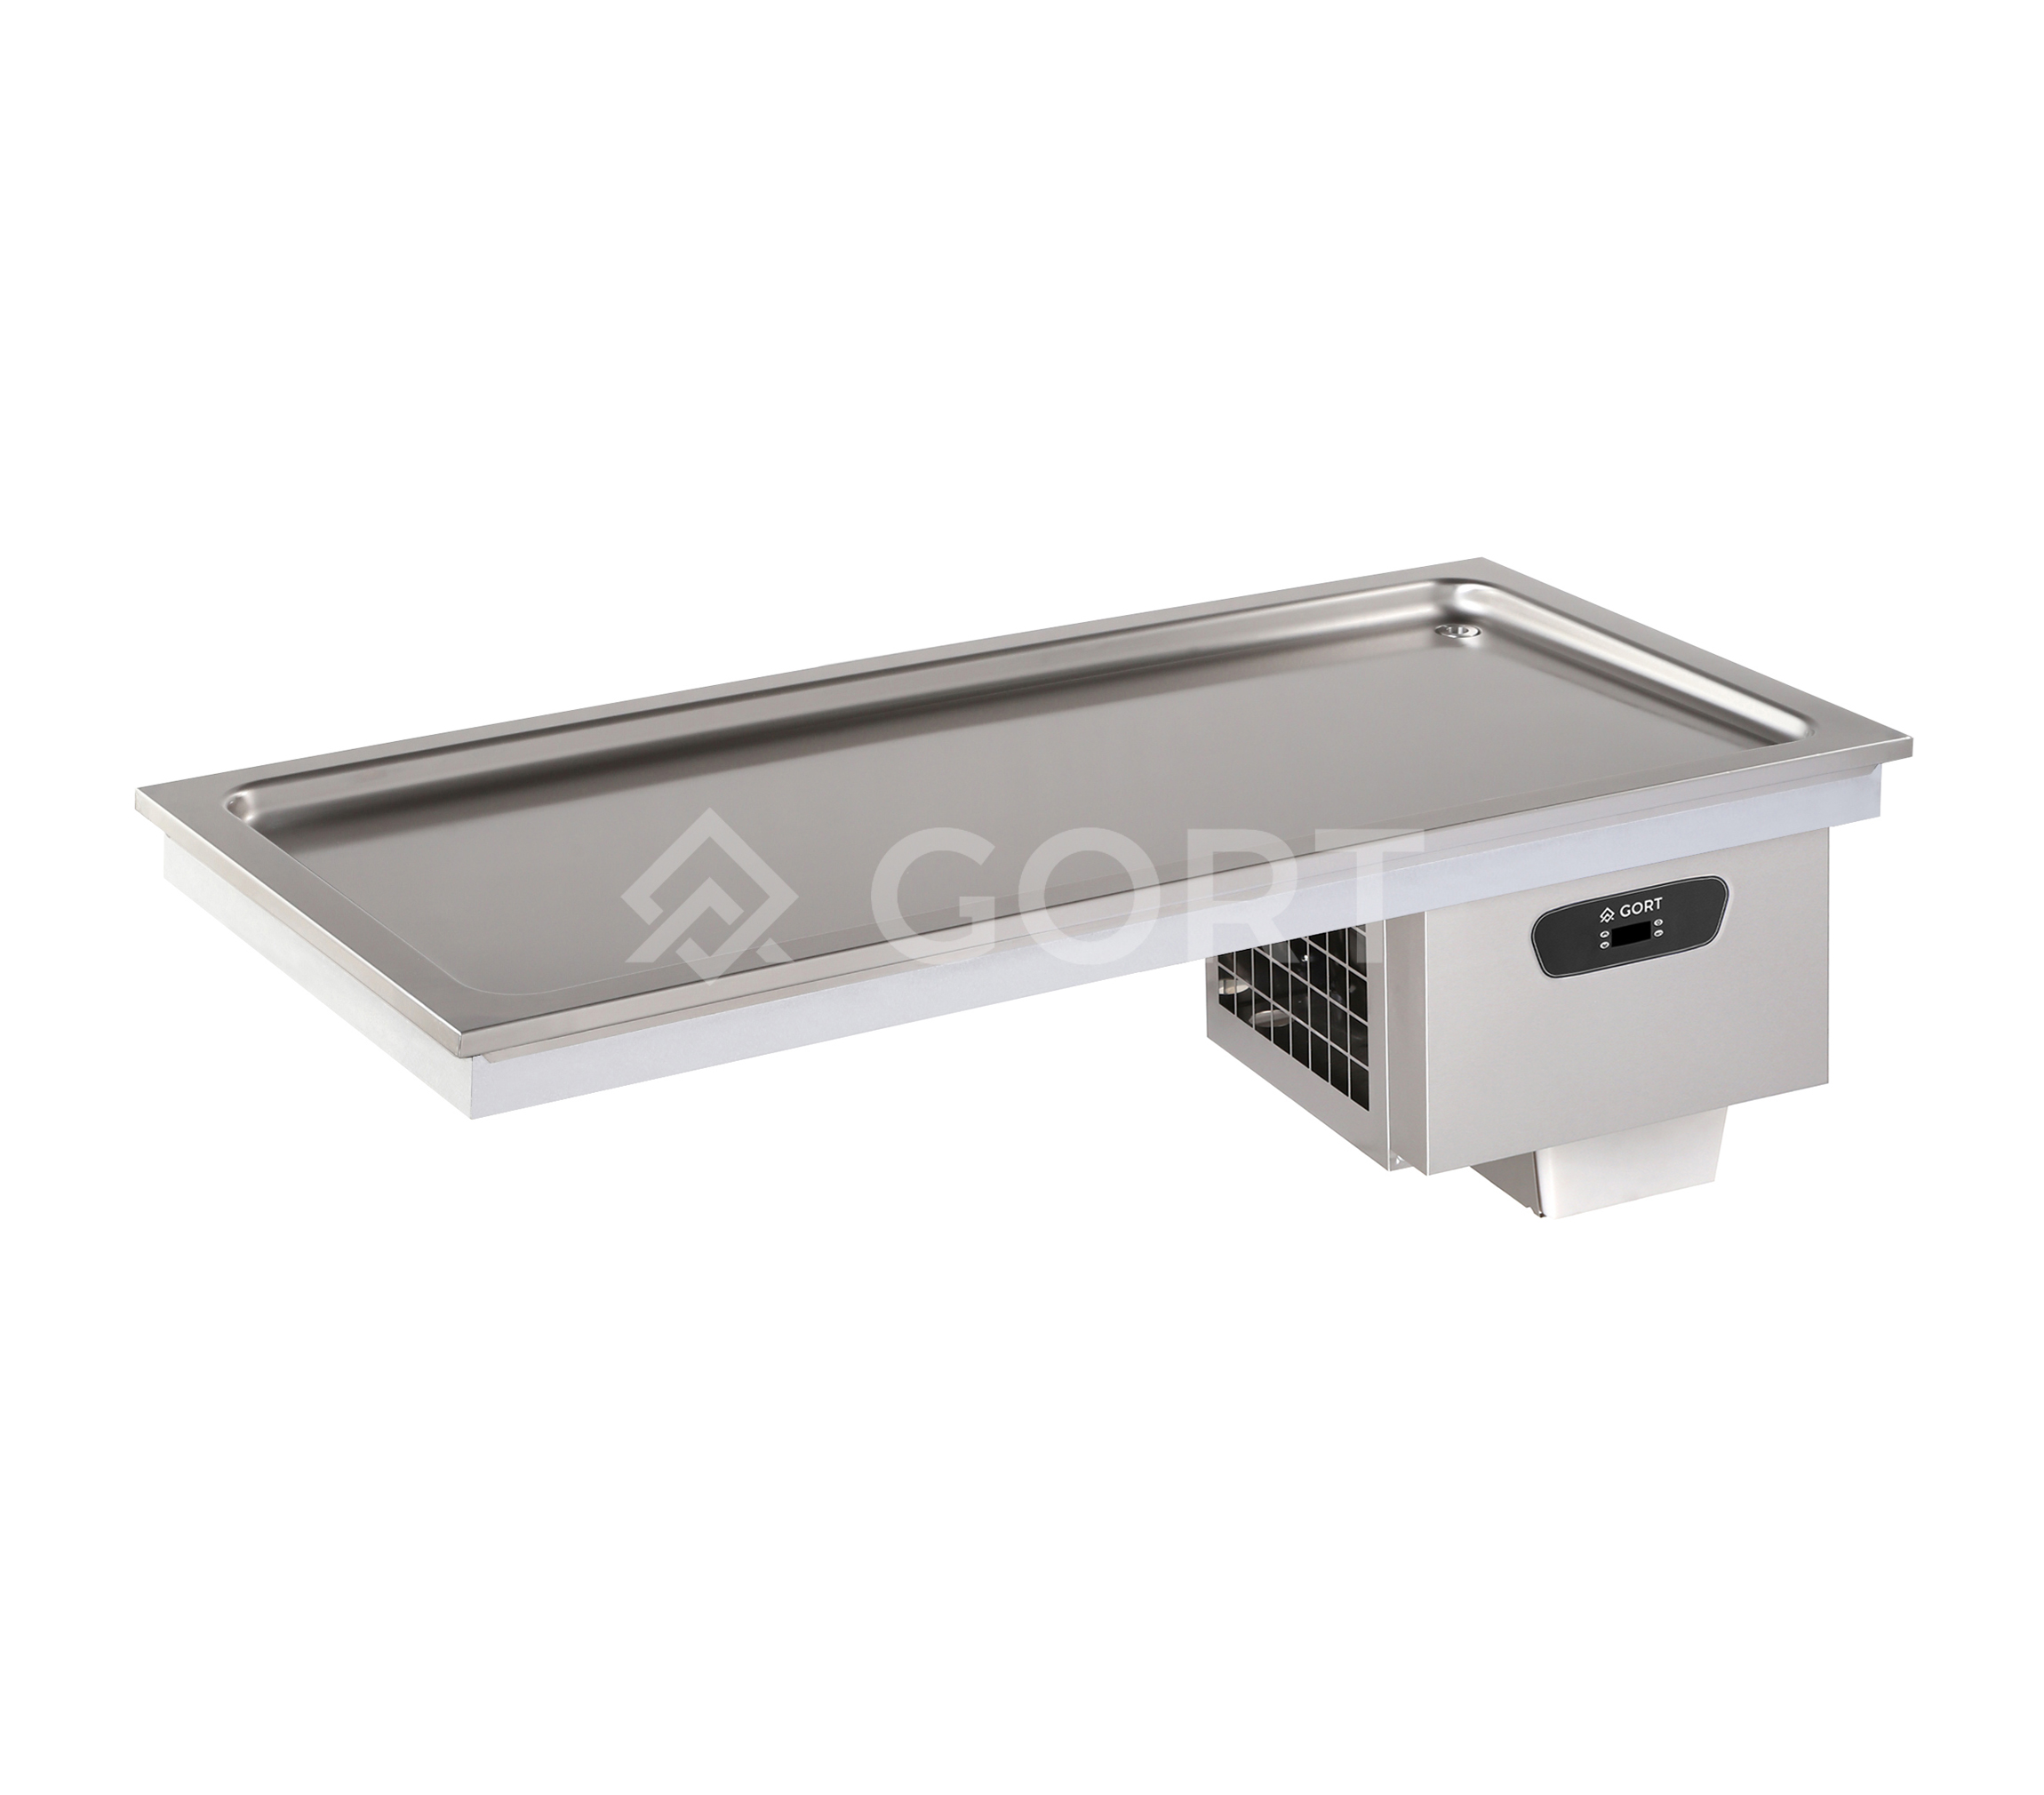 Refrigerated static top DROP-IN, 4 x GN1/1